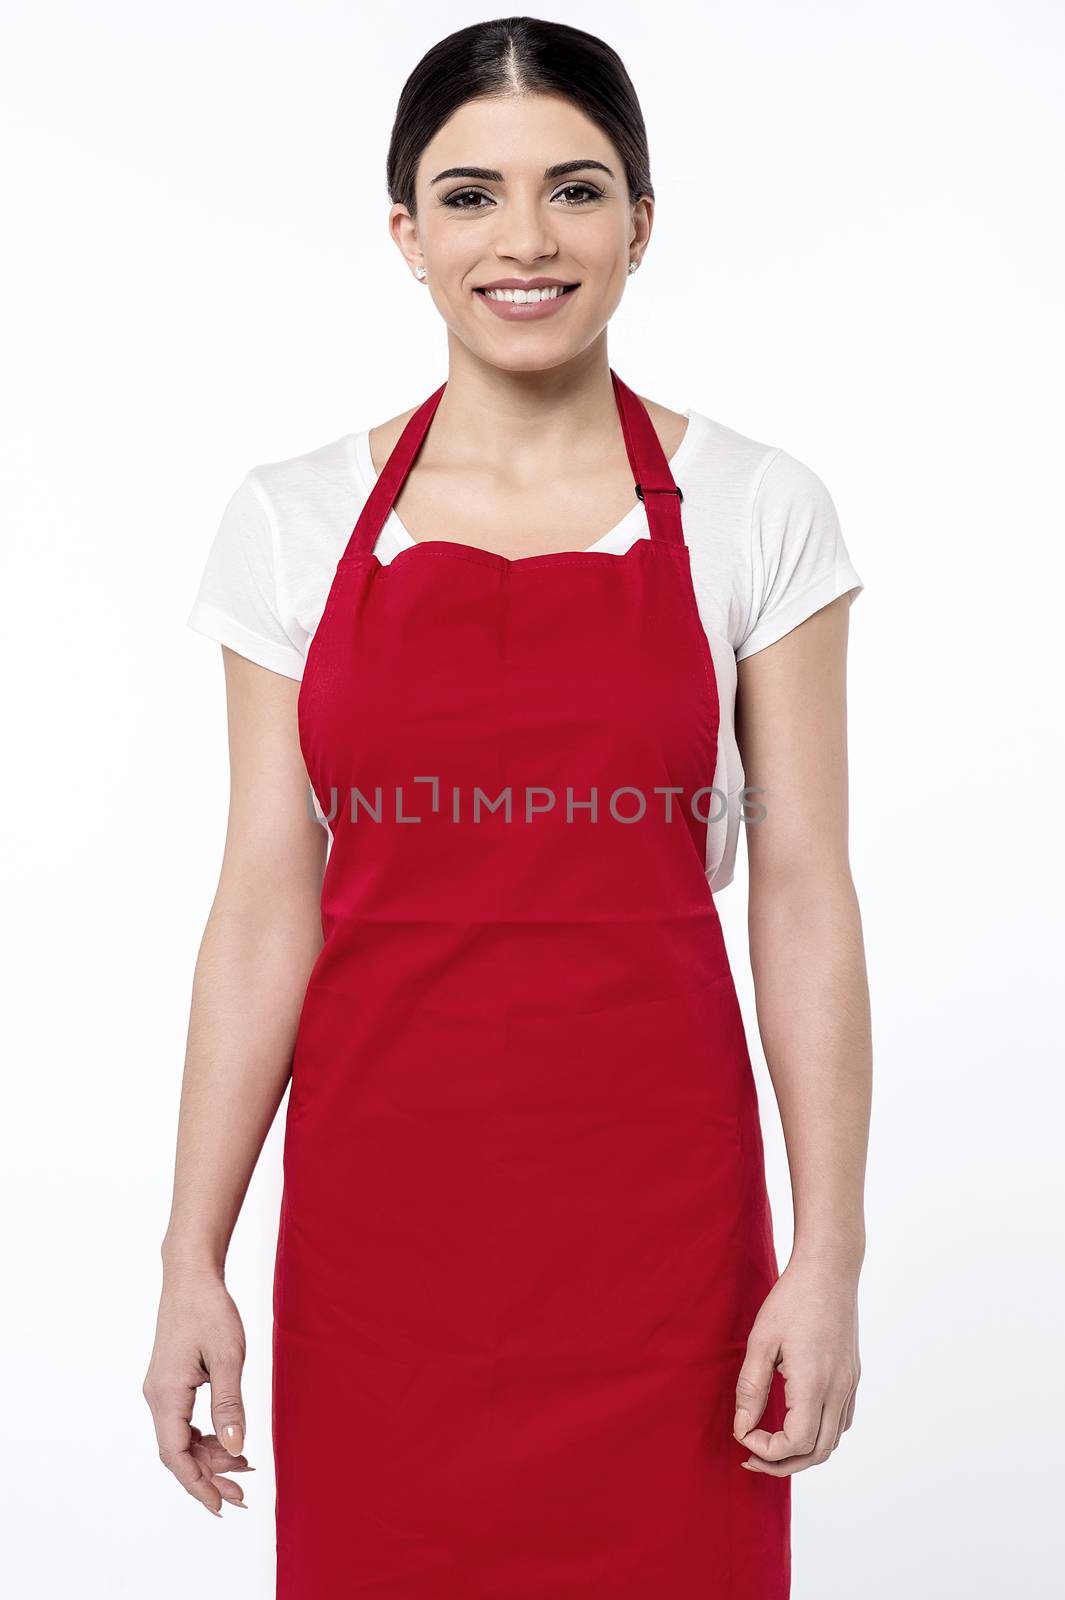 Image of a young female chef posing over white